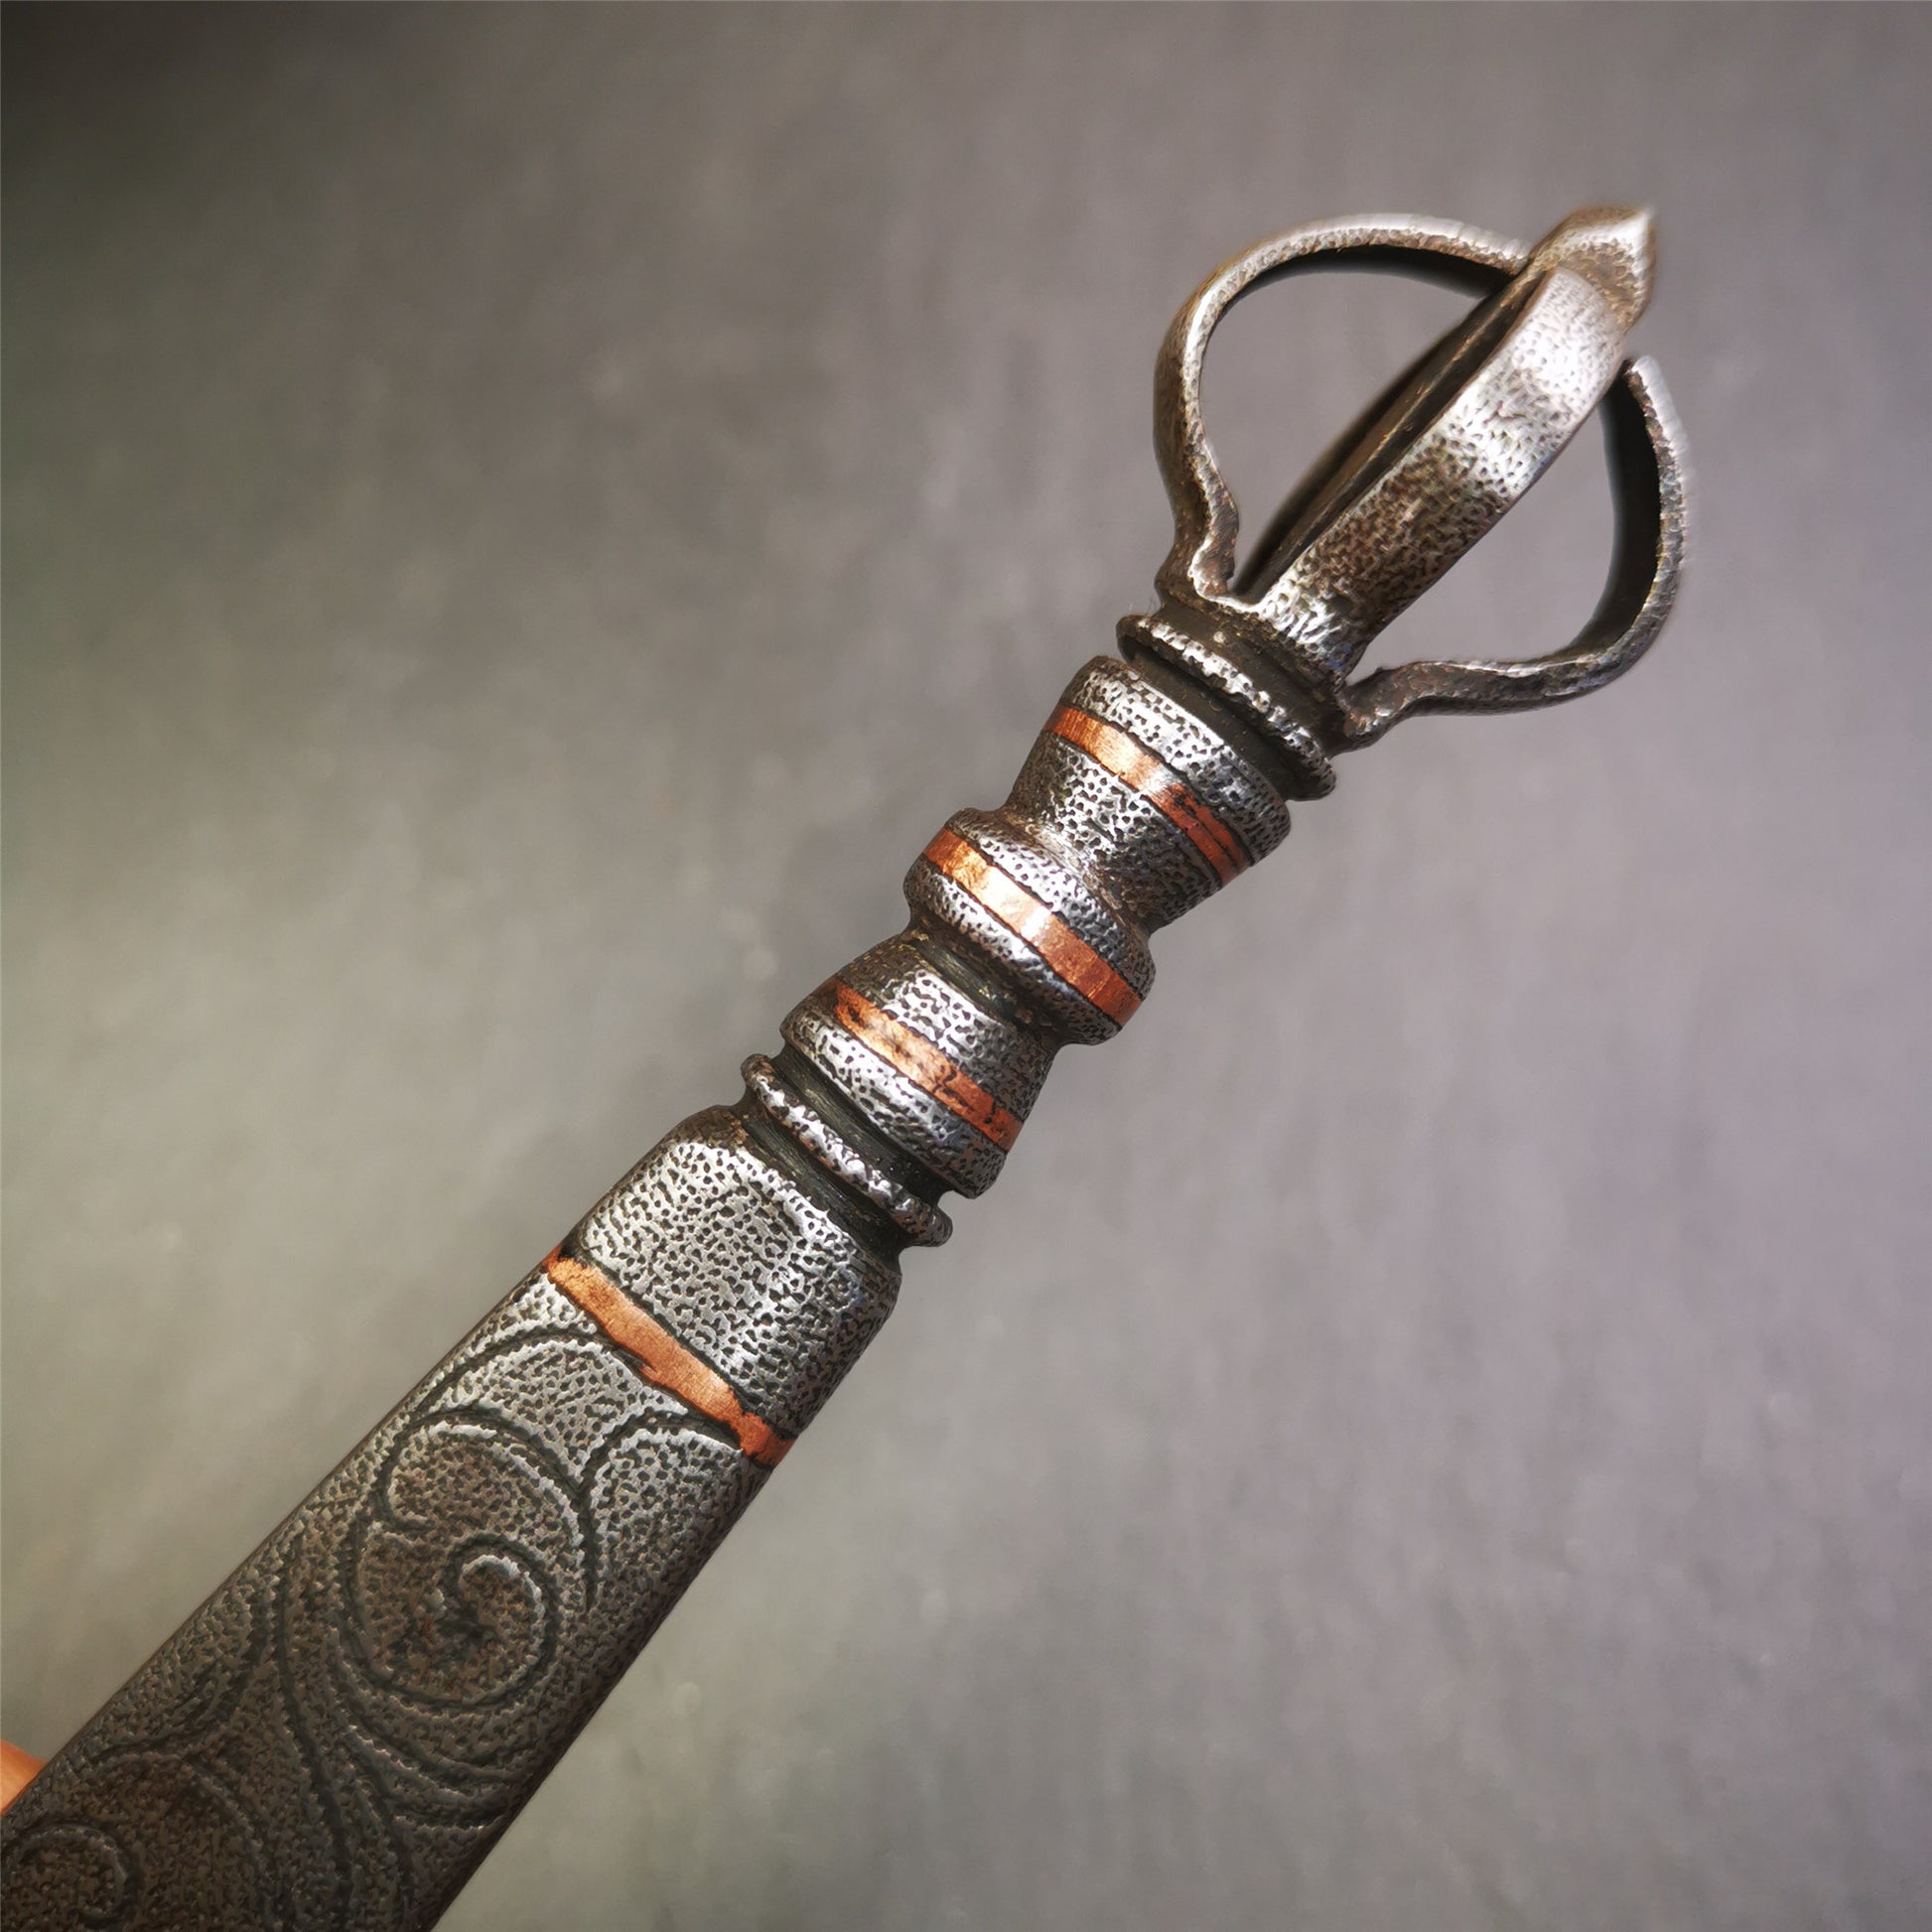 This phurba / vajra sword was handmade by Tibetan craftsmen from Tibet in 1990.It is Fire Vajra Sword of Wisdom Buddha Manjushri,made of cold iron, carved cloud pattern, inlaid red copper, made into 3 line on handle, and the half vajra at the tail.